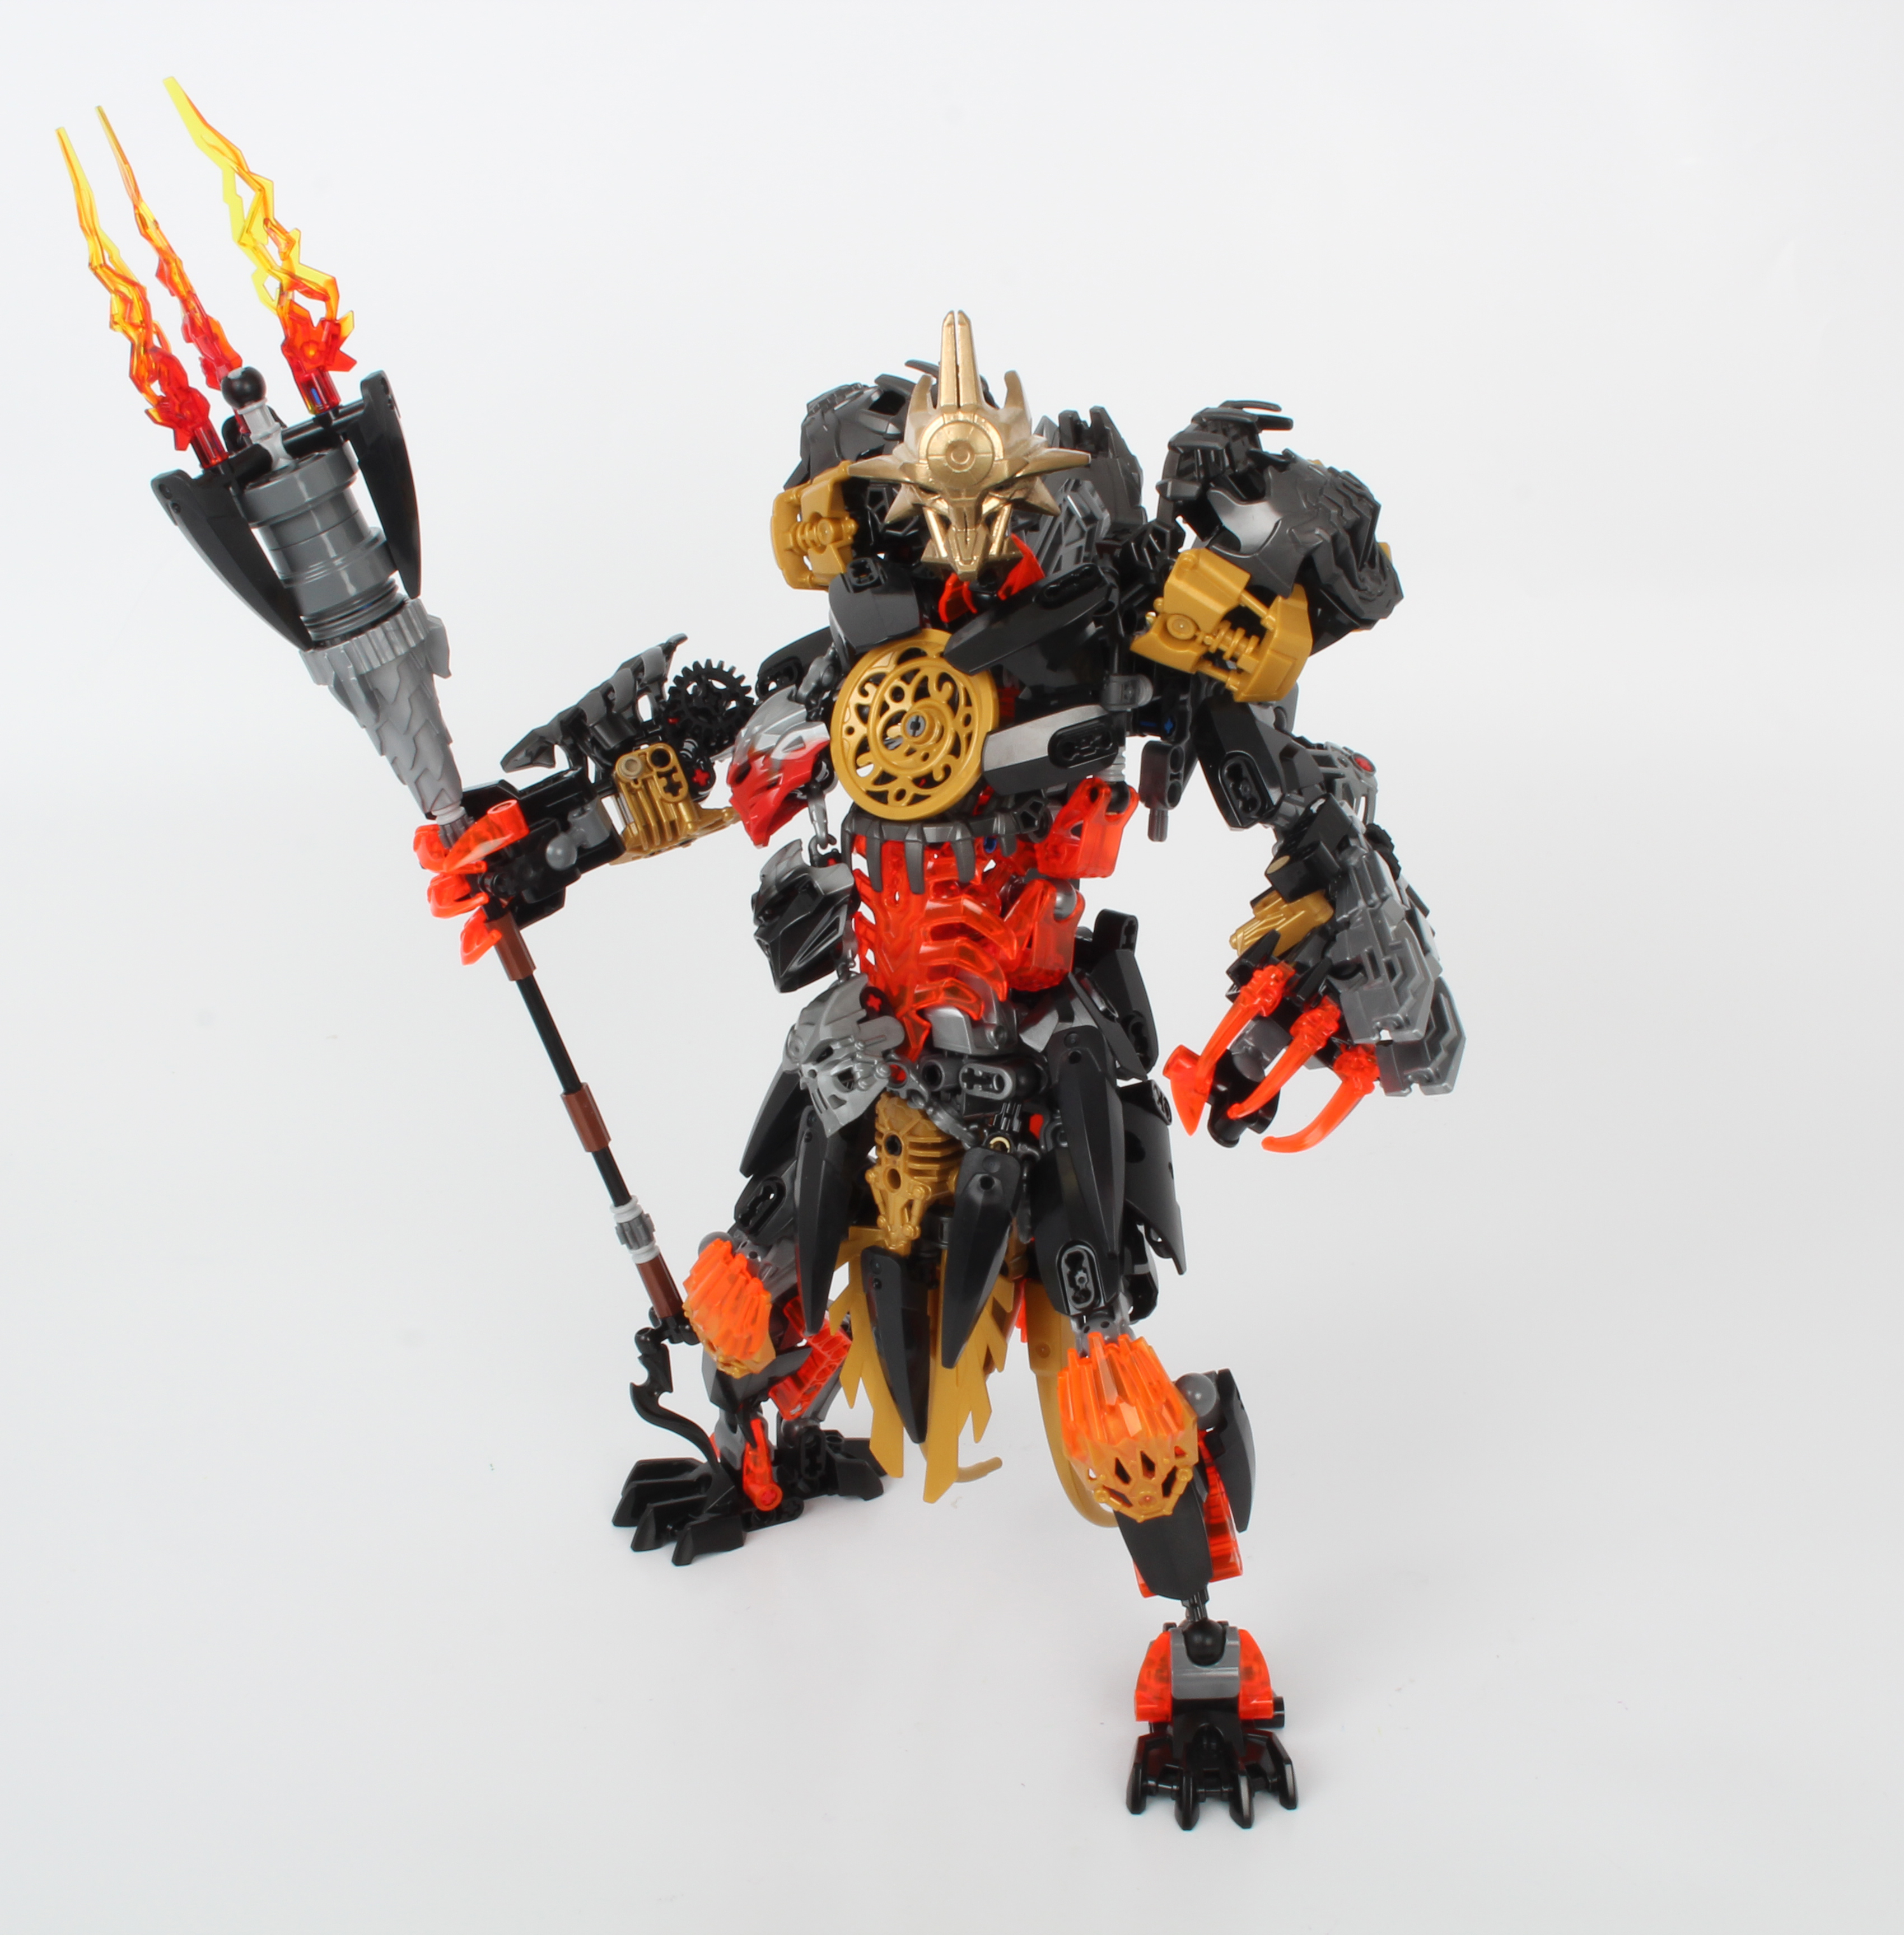 [DISCUSSION] BIONICLE and Hero Factory - â¡ RangerBoard